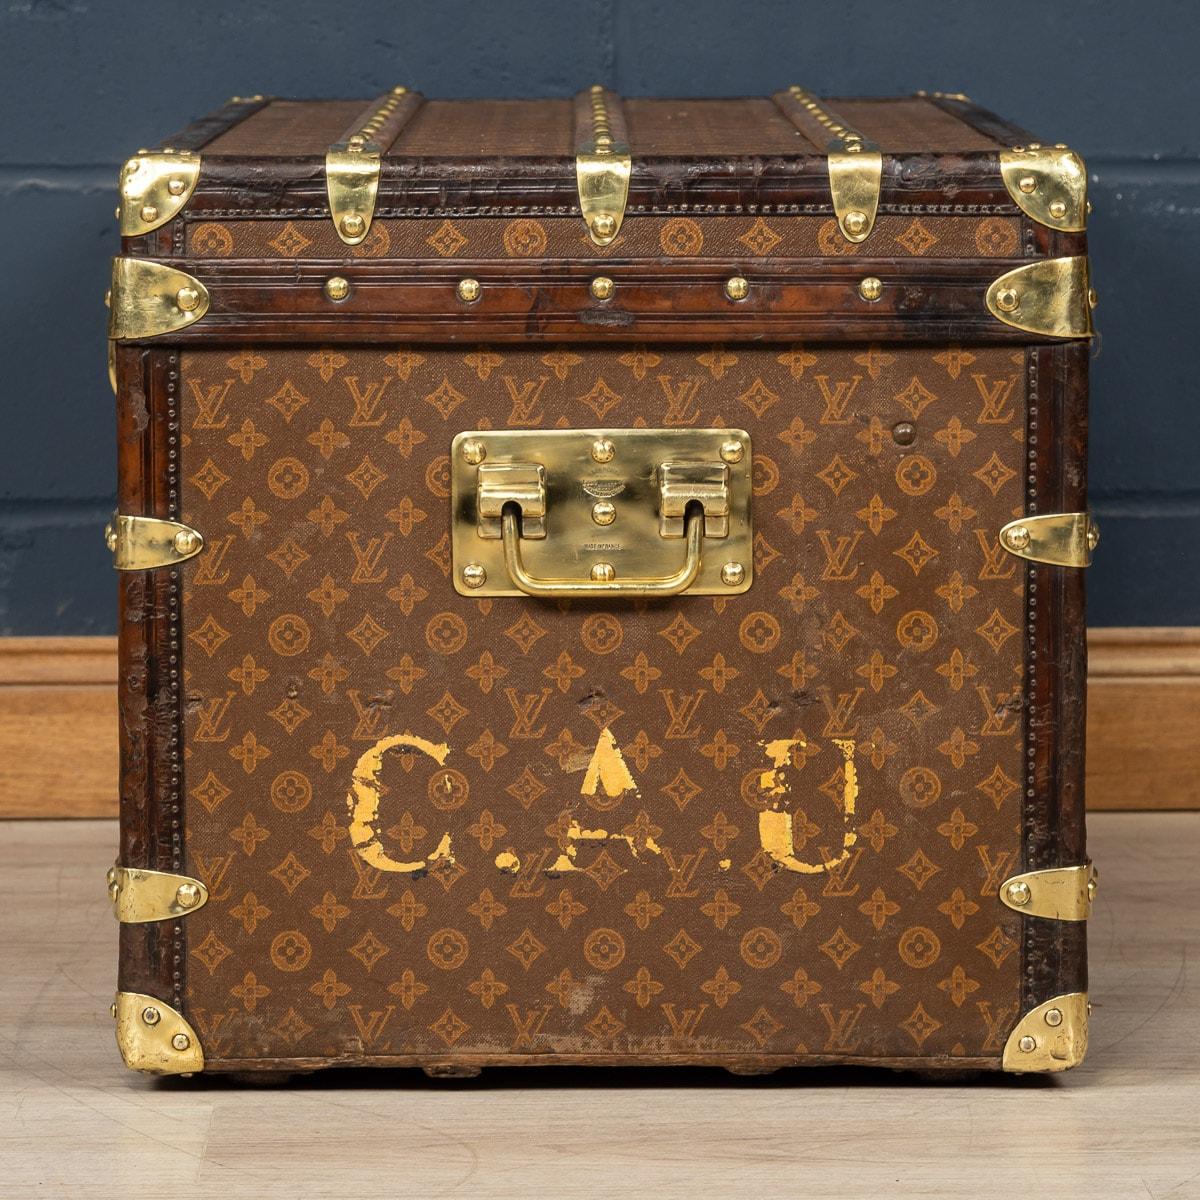 Brass 20th Century Louis Vuitton Trunk In Monogram Canvas, France, c.1900 For Sale